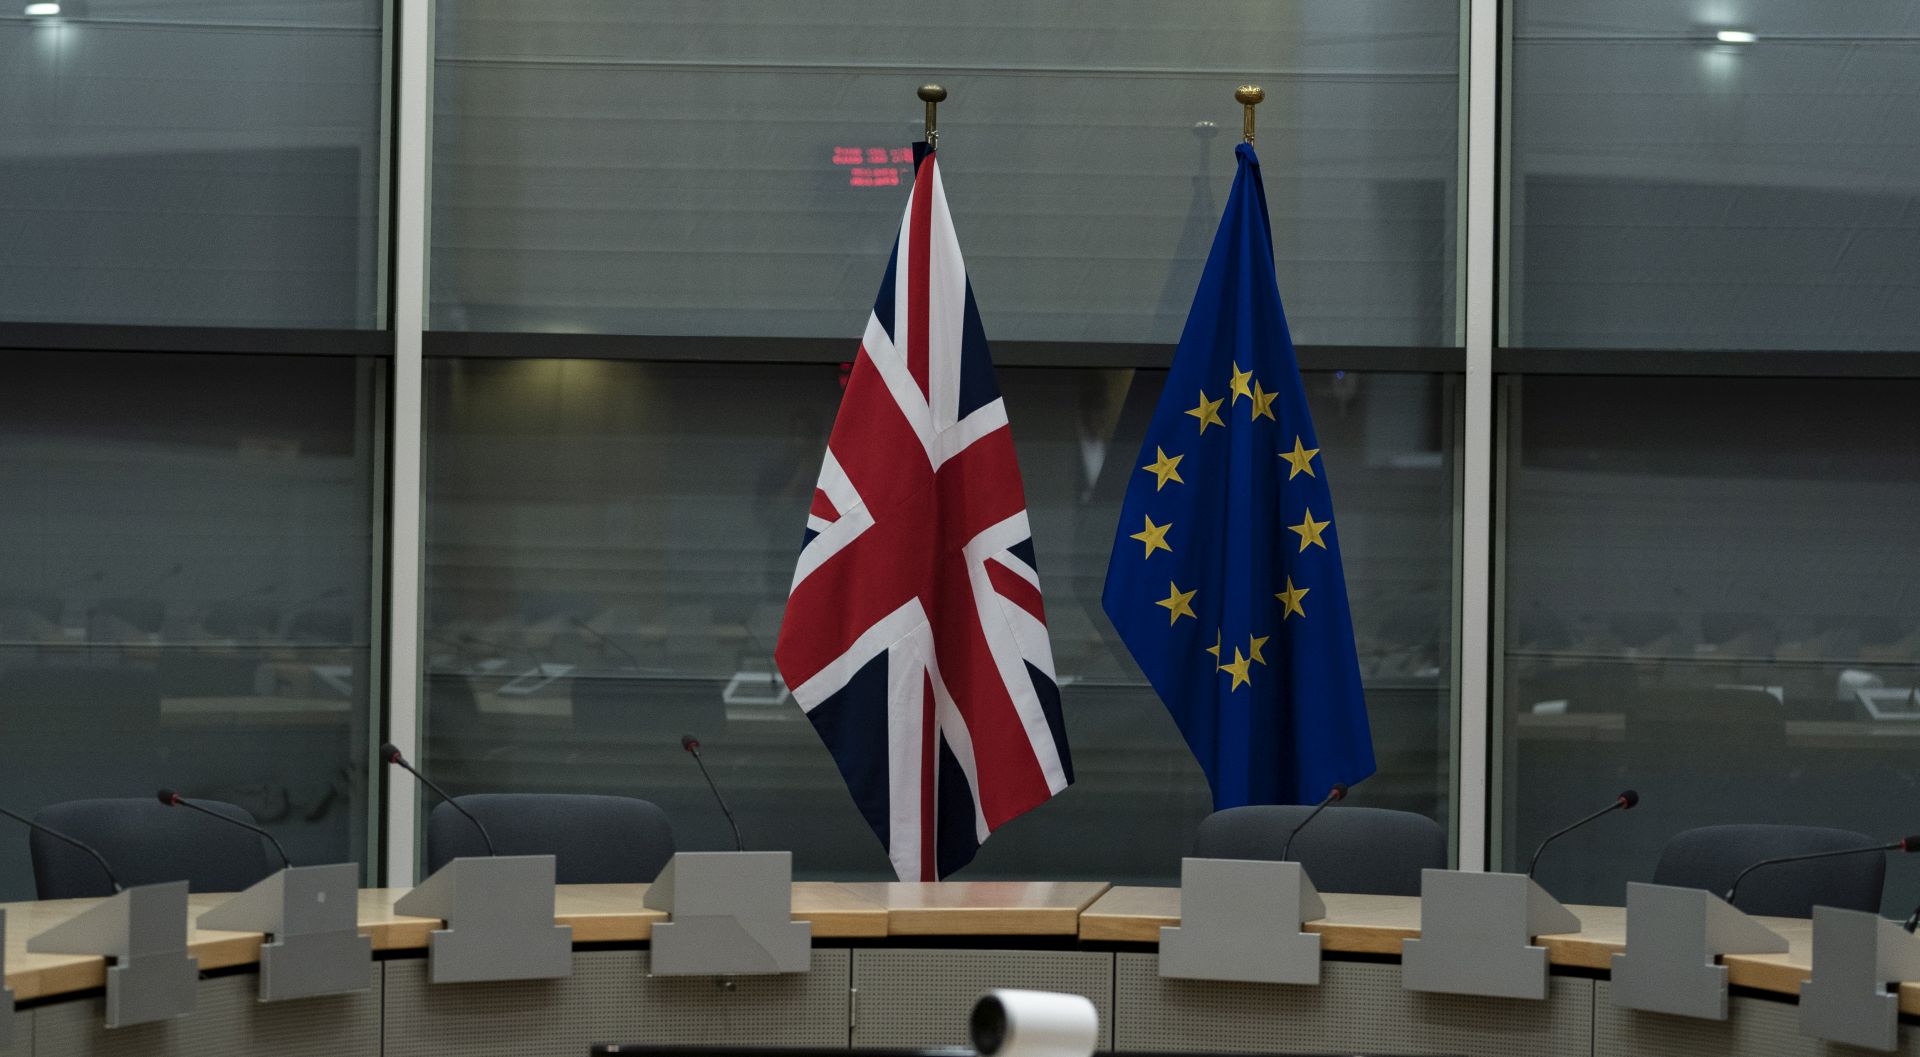 epa07855966 Table of Negotiation before a meeting of Britain's Secretary of State for Exiting the European Union Stephen Barclay with European Union's chief Brexit negotiator Michel Barnier in Brussels, Belgium, 20 September 2019.  EPA/KENZO TRIBOUILLARD / POOL